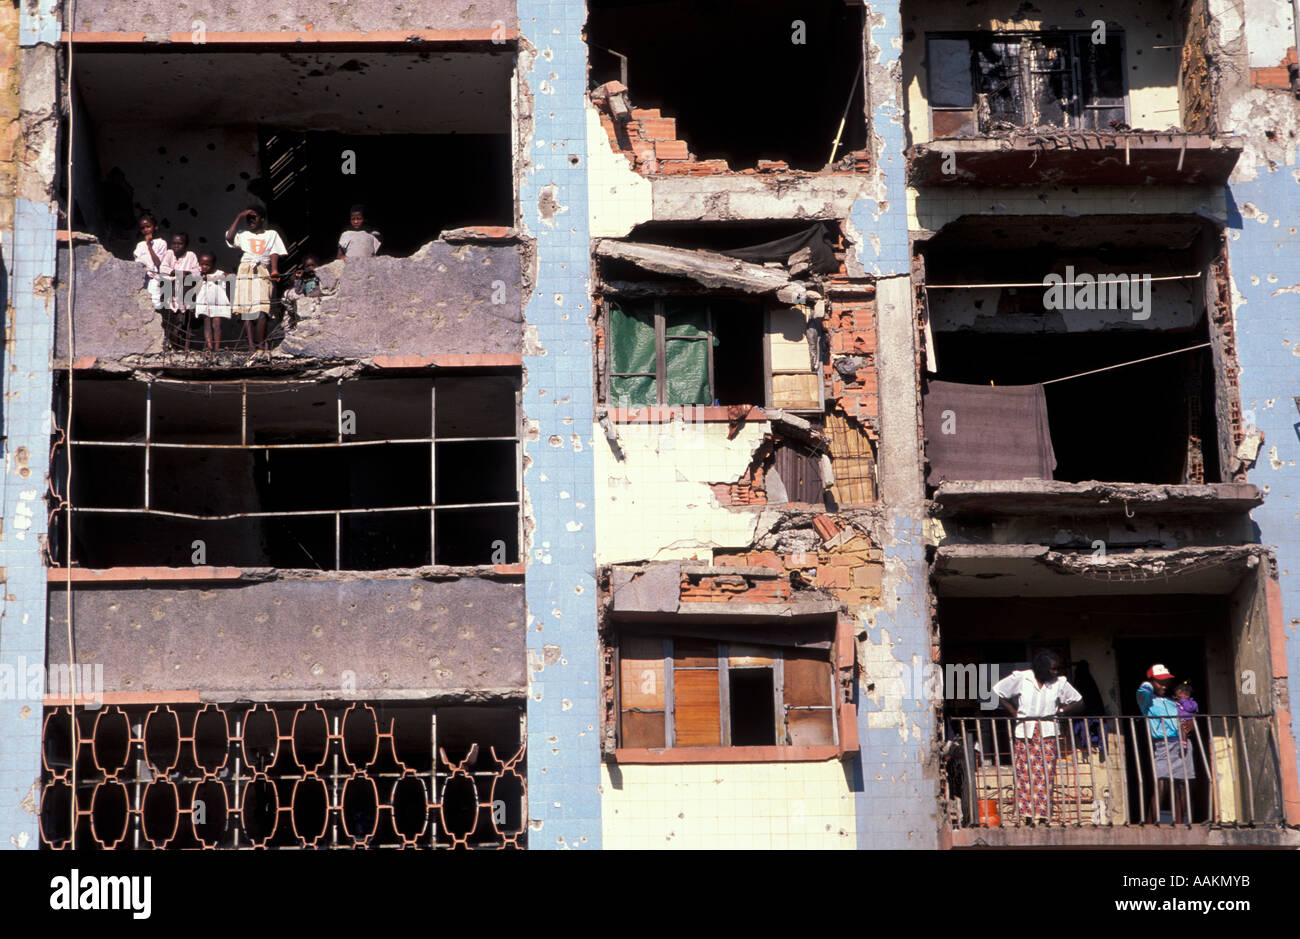 Building destroyed during war between UNITA and Angola military forces, Kuito city, Bié province, Angola, Africa, 1995. Stock Photo